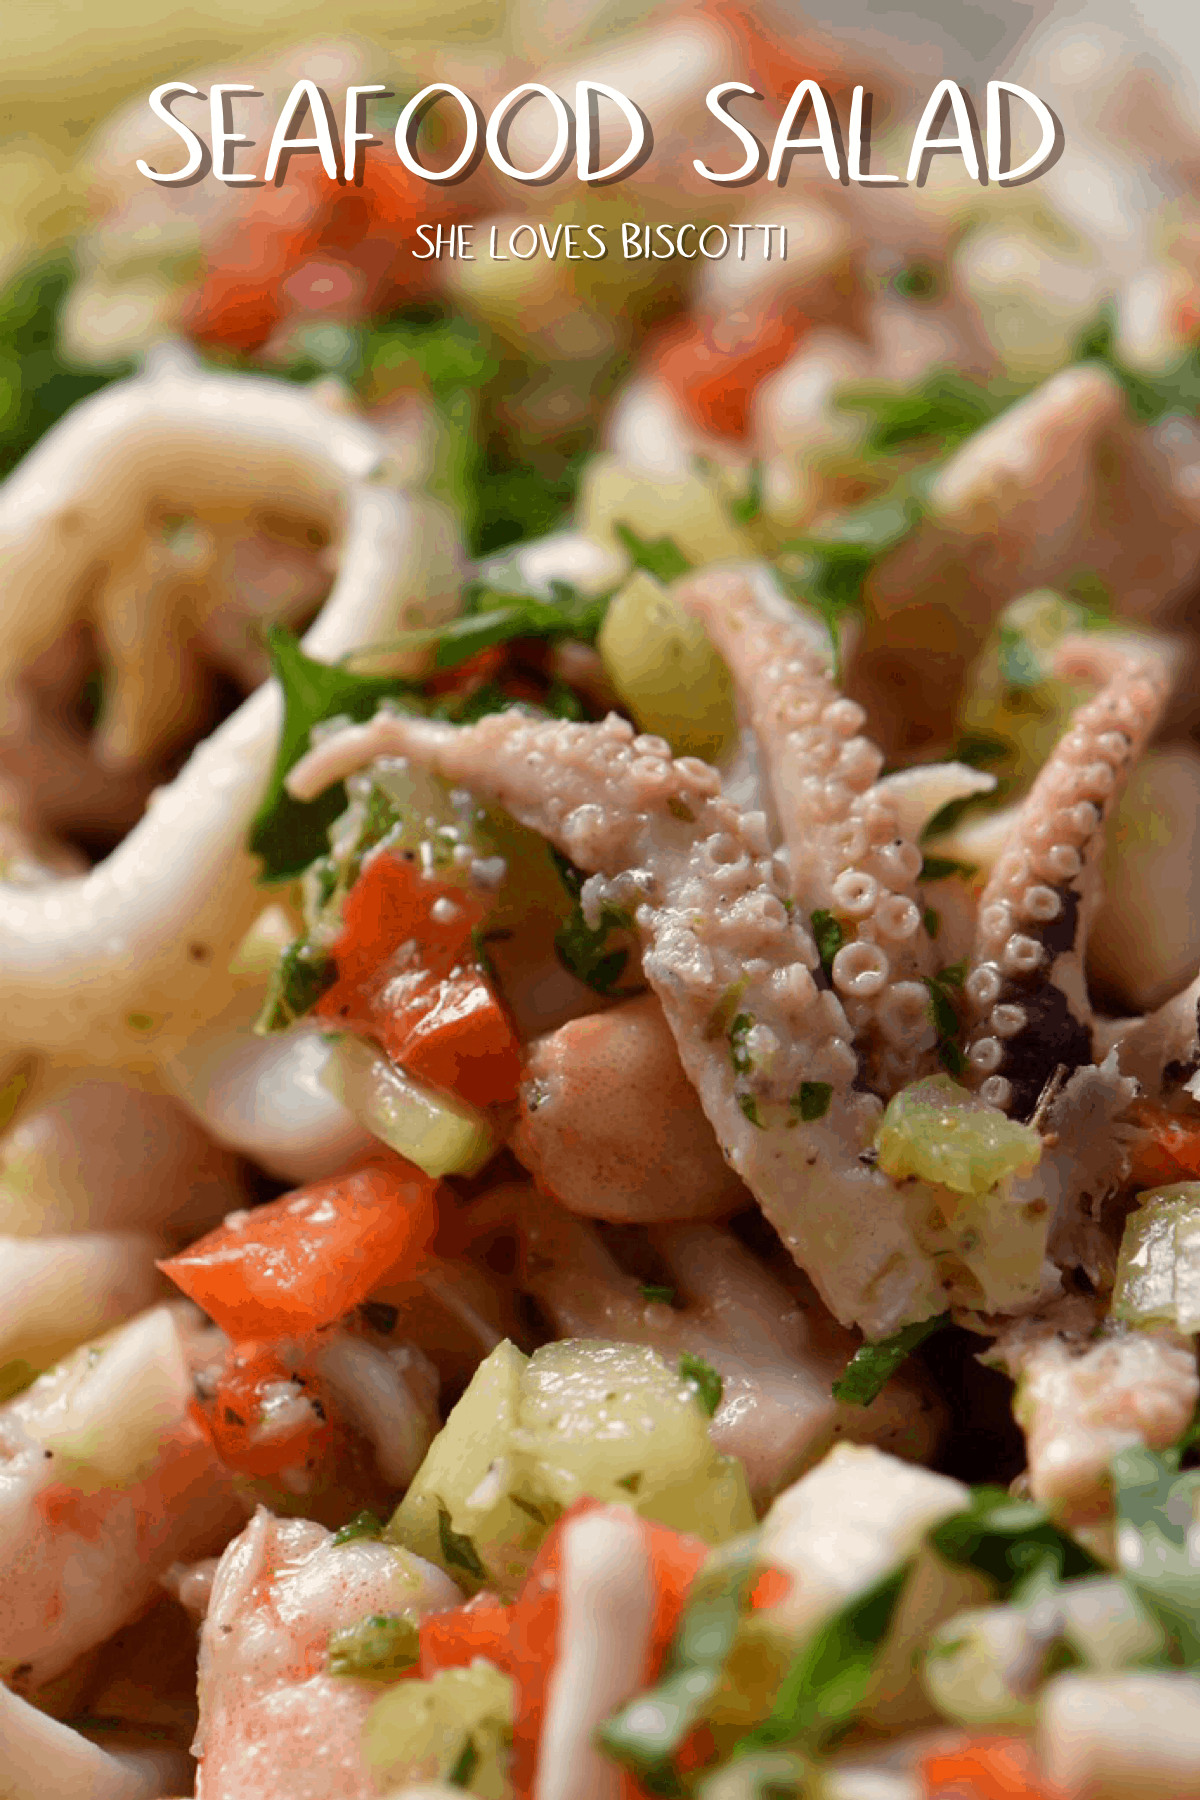 Seafood Appetizers Italian
 Seafood Salad The Ultimate Italian Appetizer She Loves